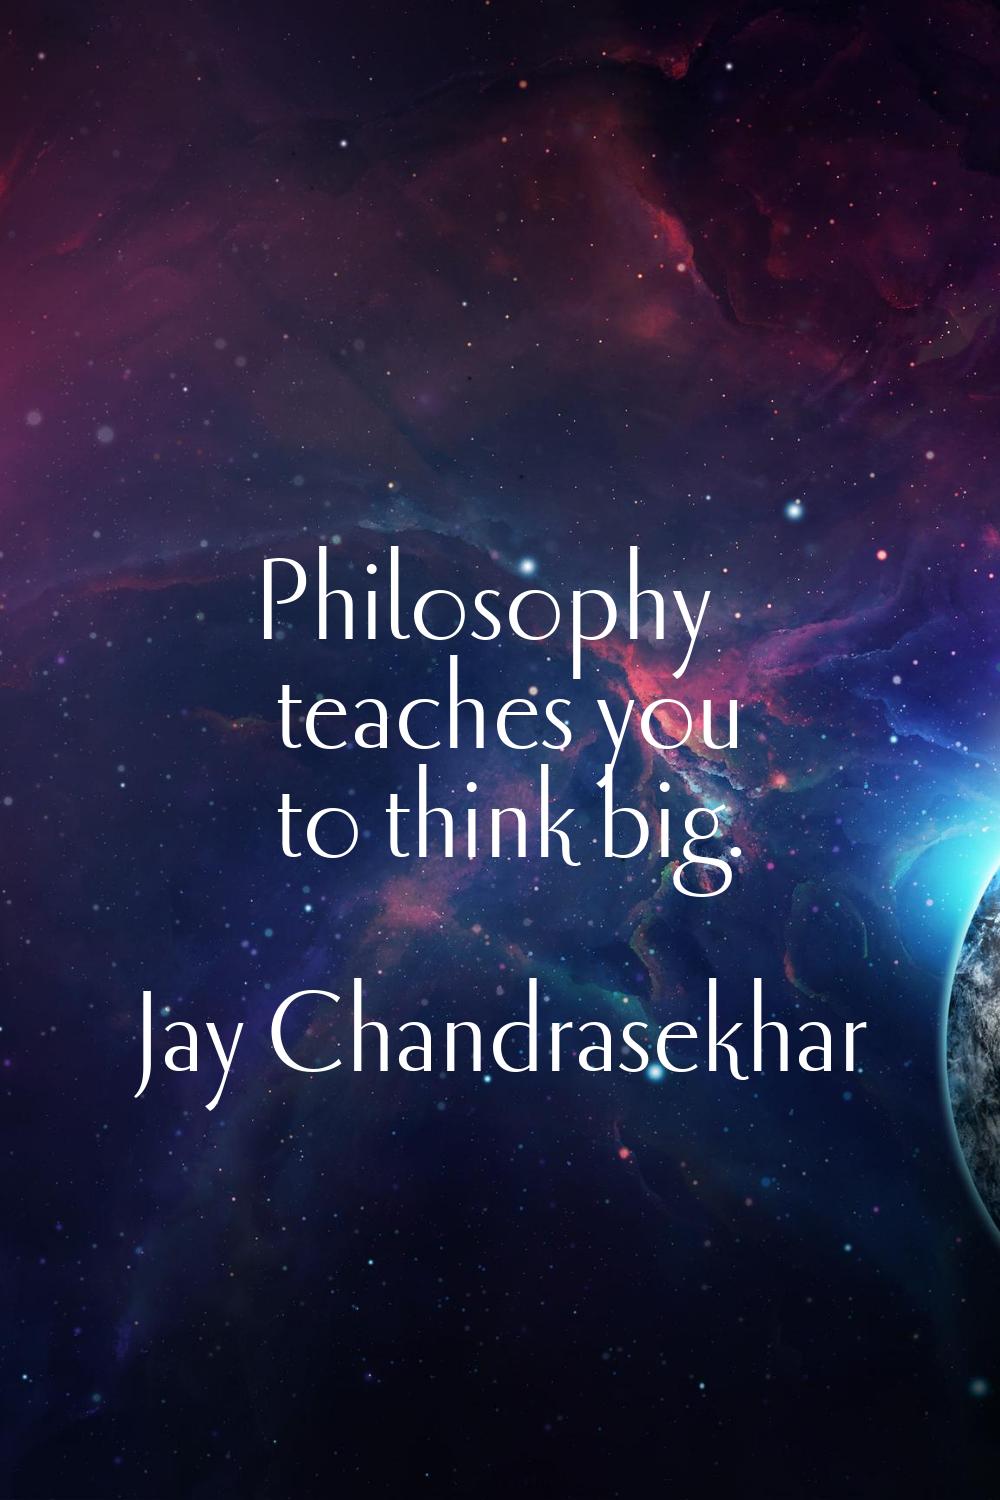 Philosophy teaches you to think big.